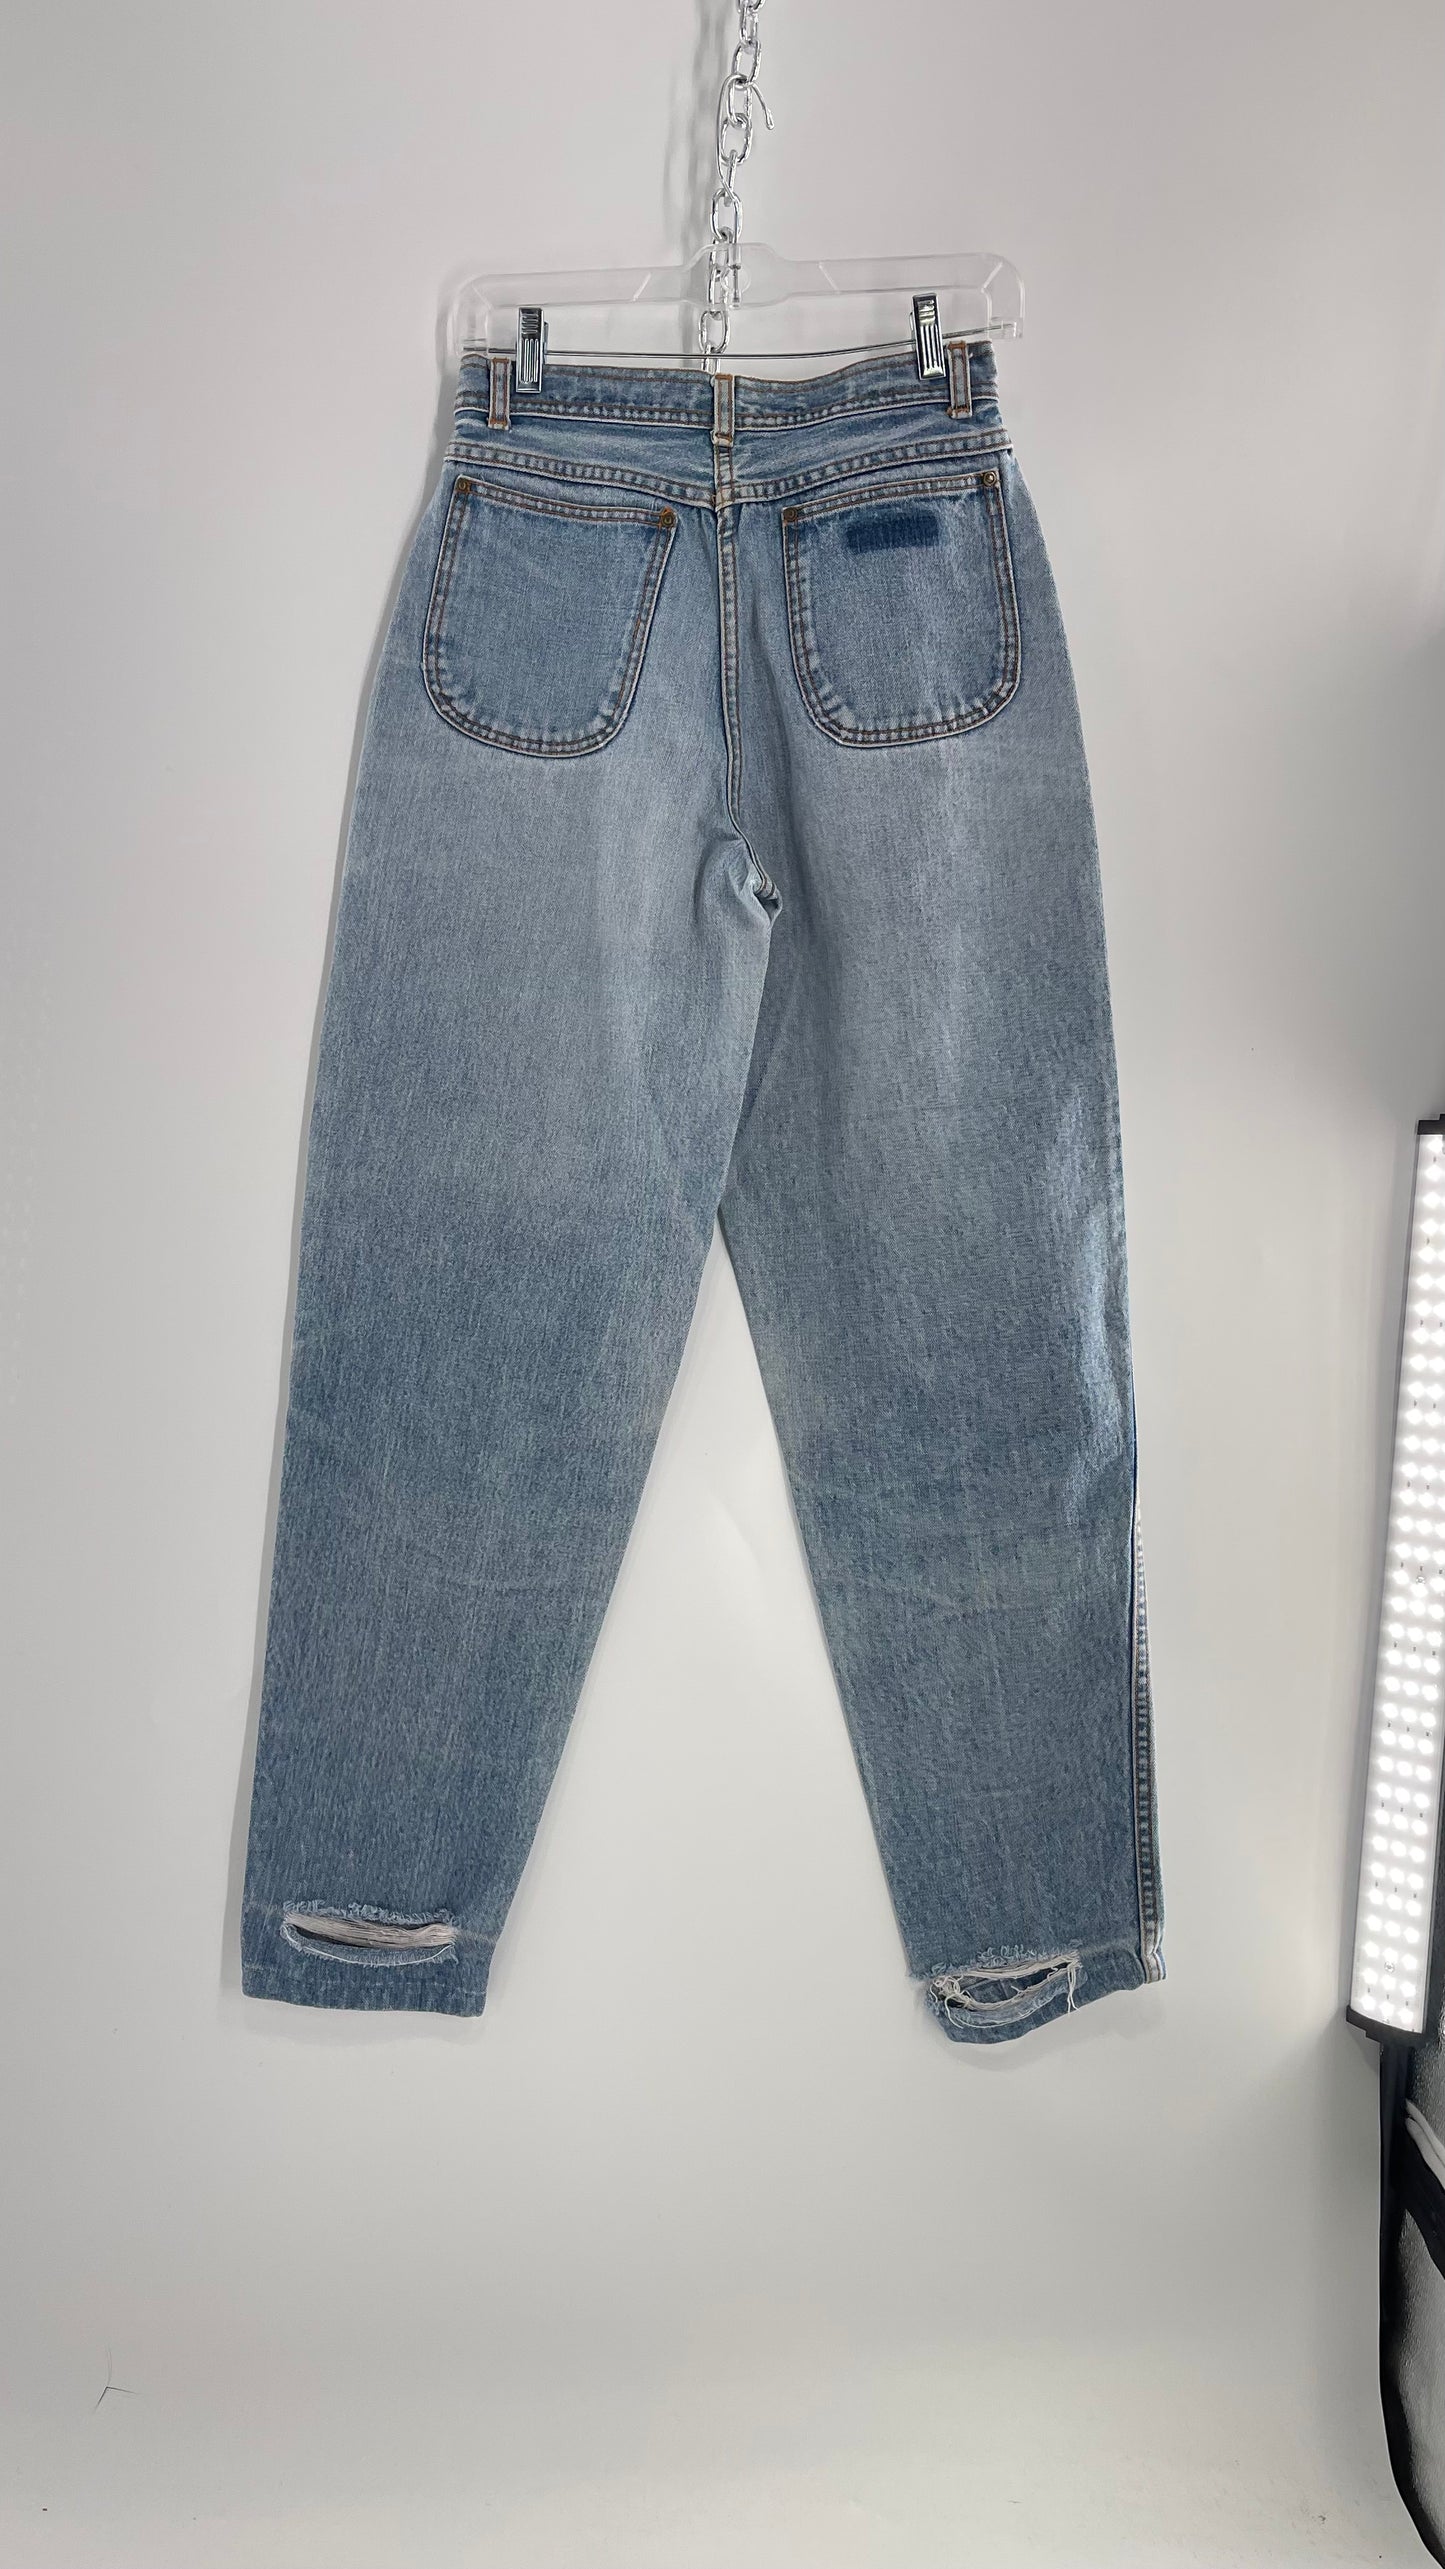 Vintage Sergio Valente Light Blue Ultra High Waisted Mom Jeans with Distressing (28)